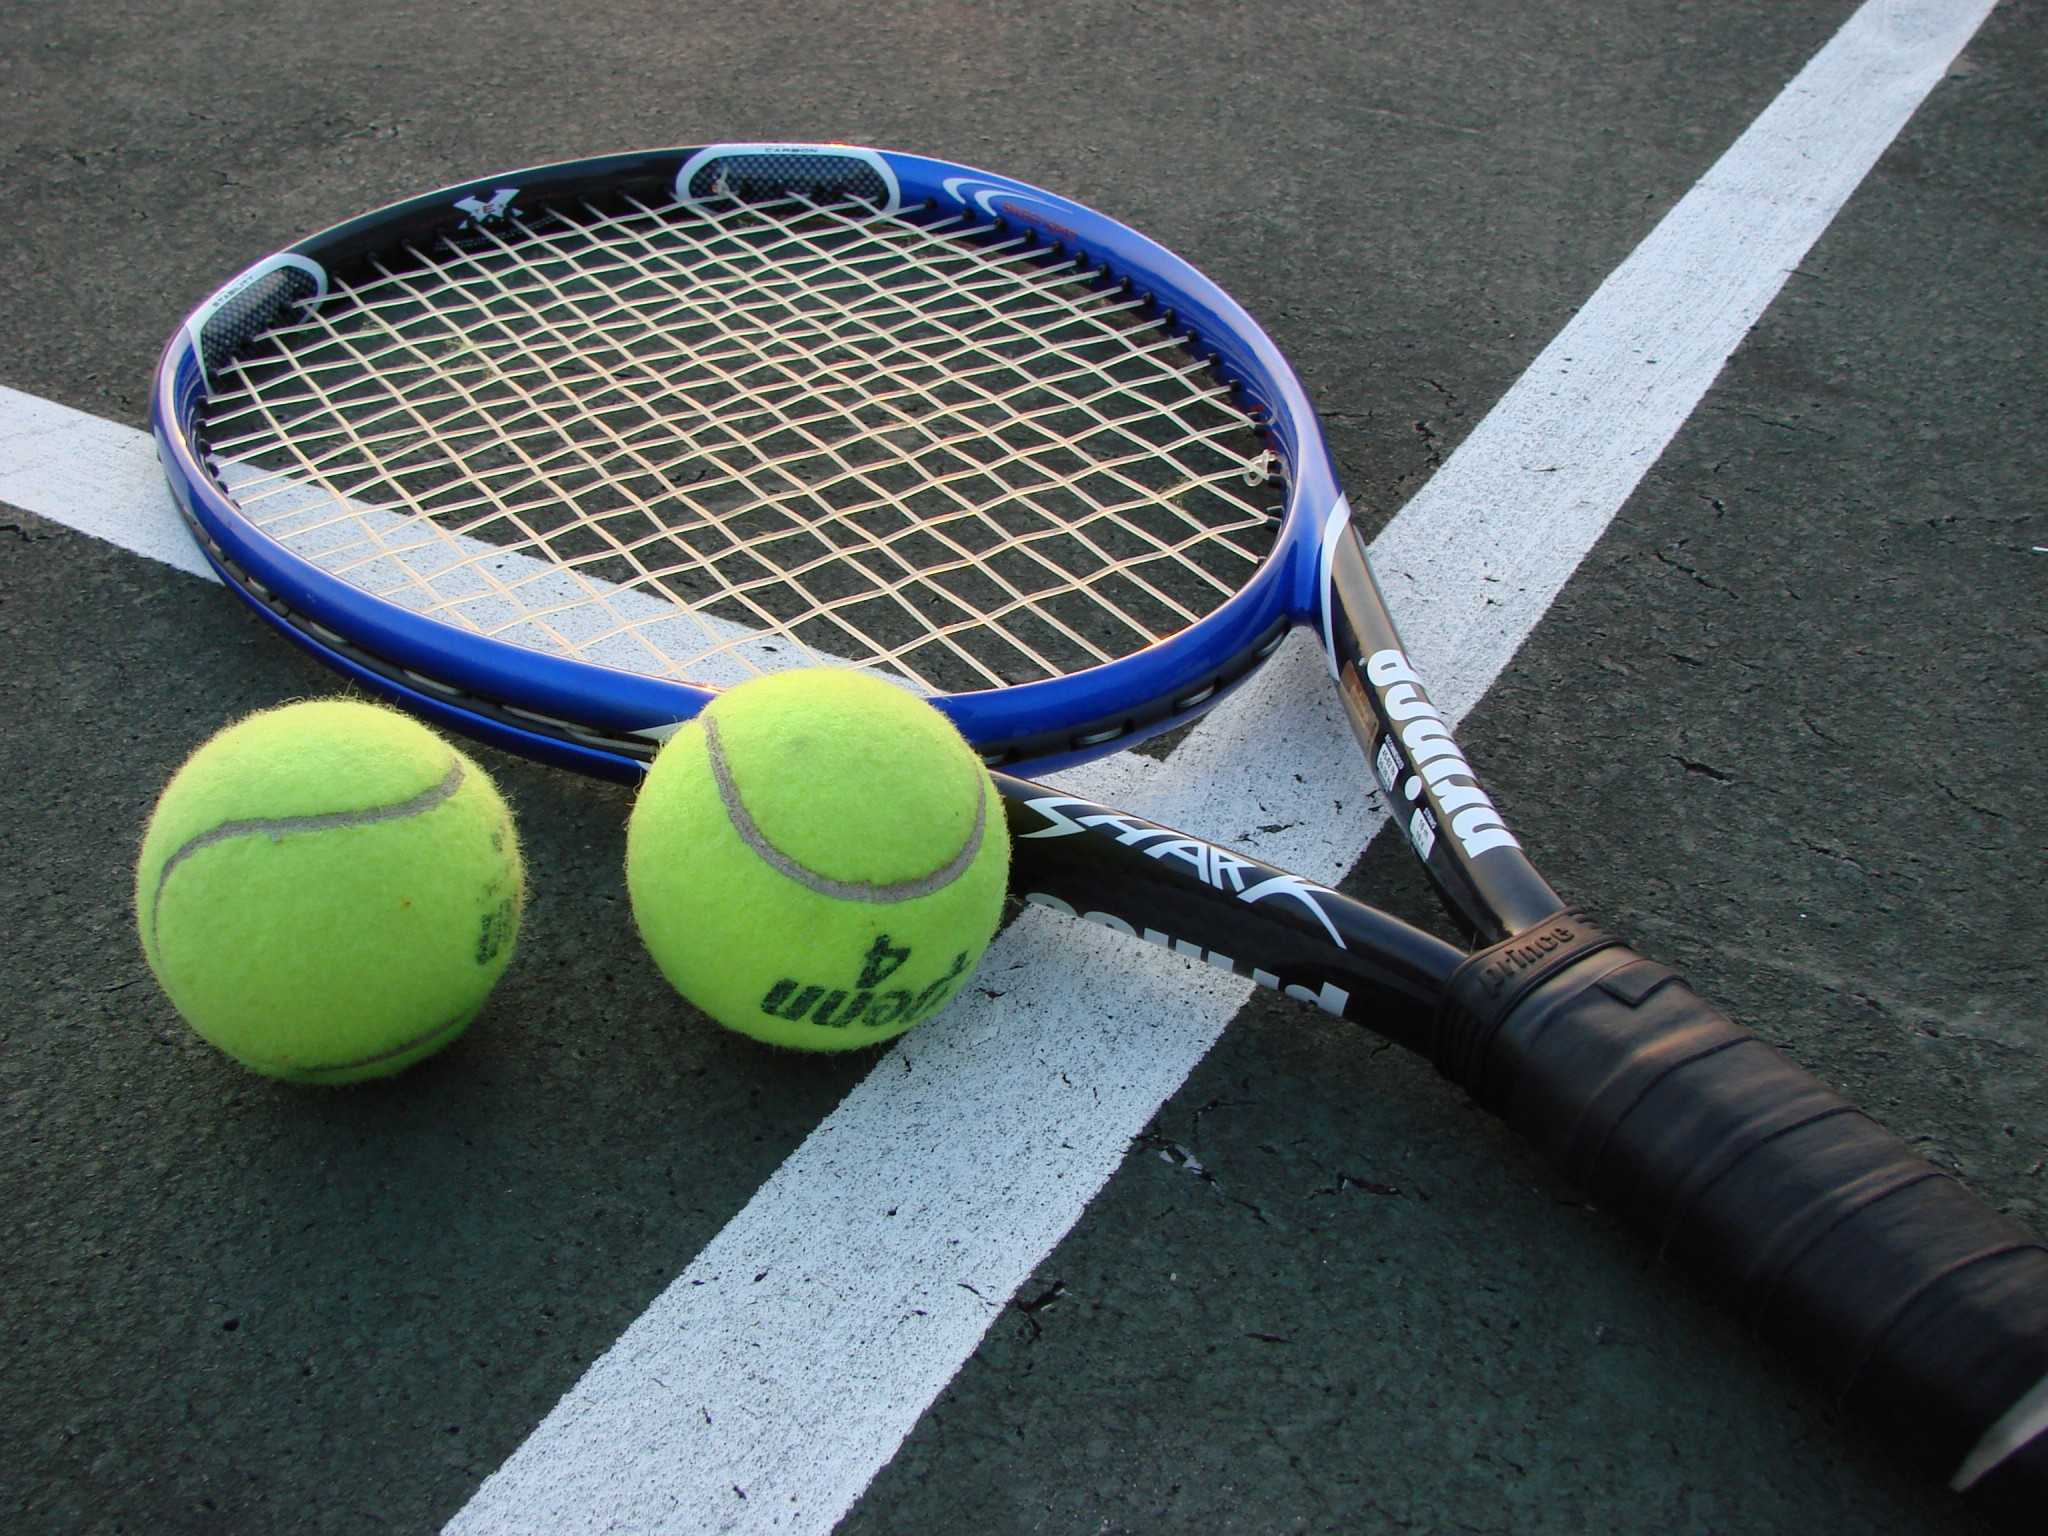 Two tennis balls sit to the left of a tennis racket on a tennis court.